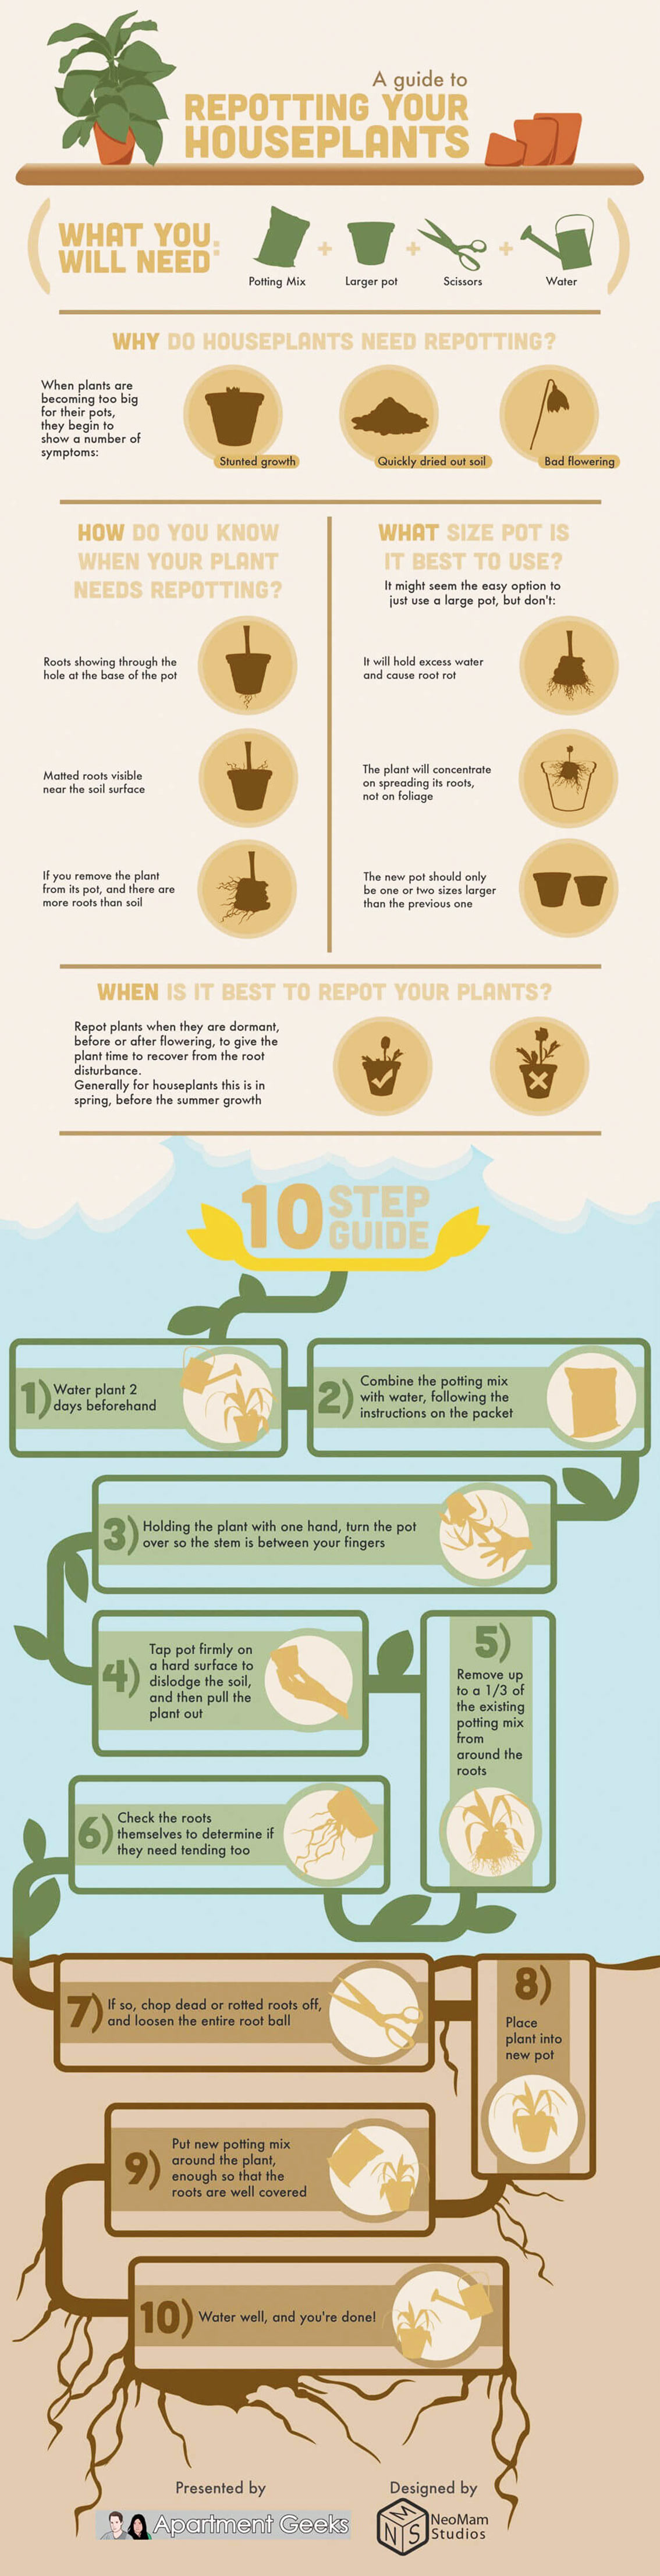 Guide to Repotting Indoor Plants Infographic